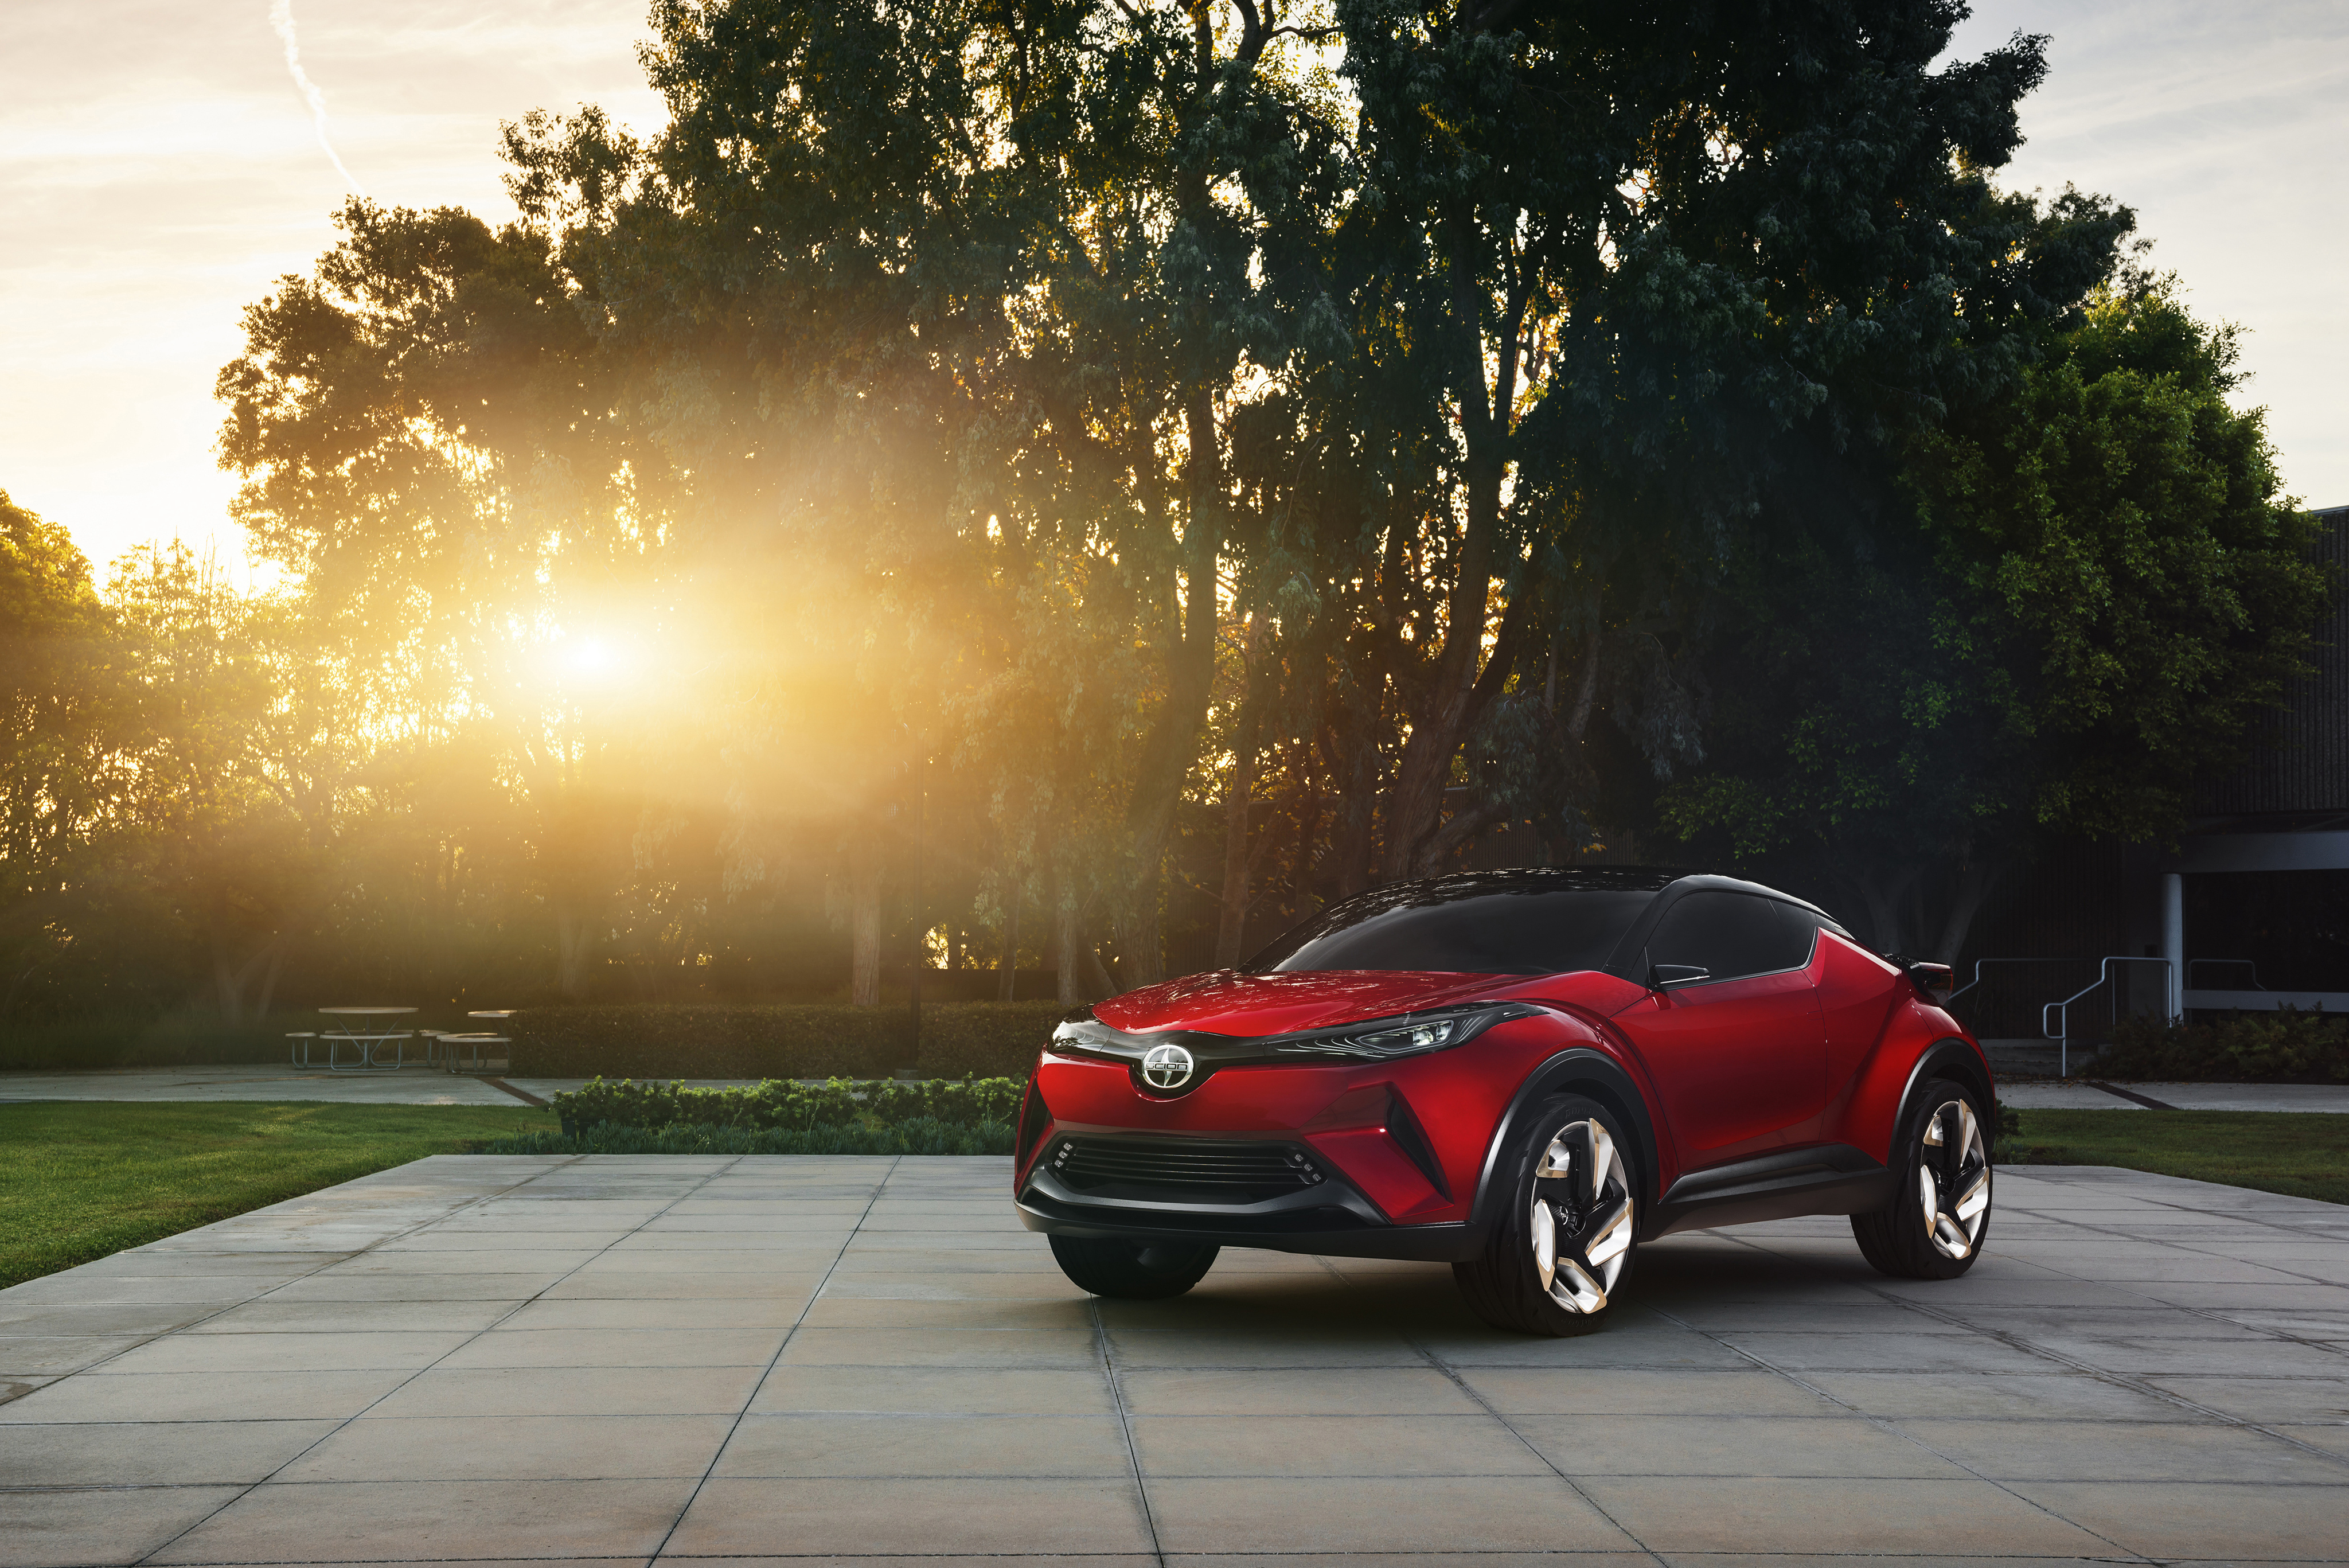 Widescreen image cars, side view, scion, c-hr